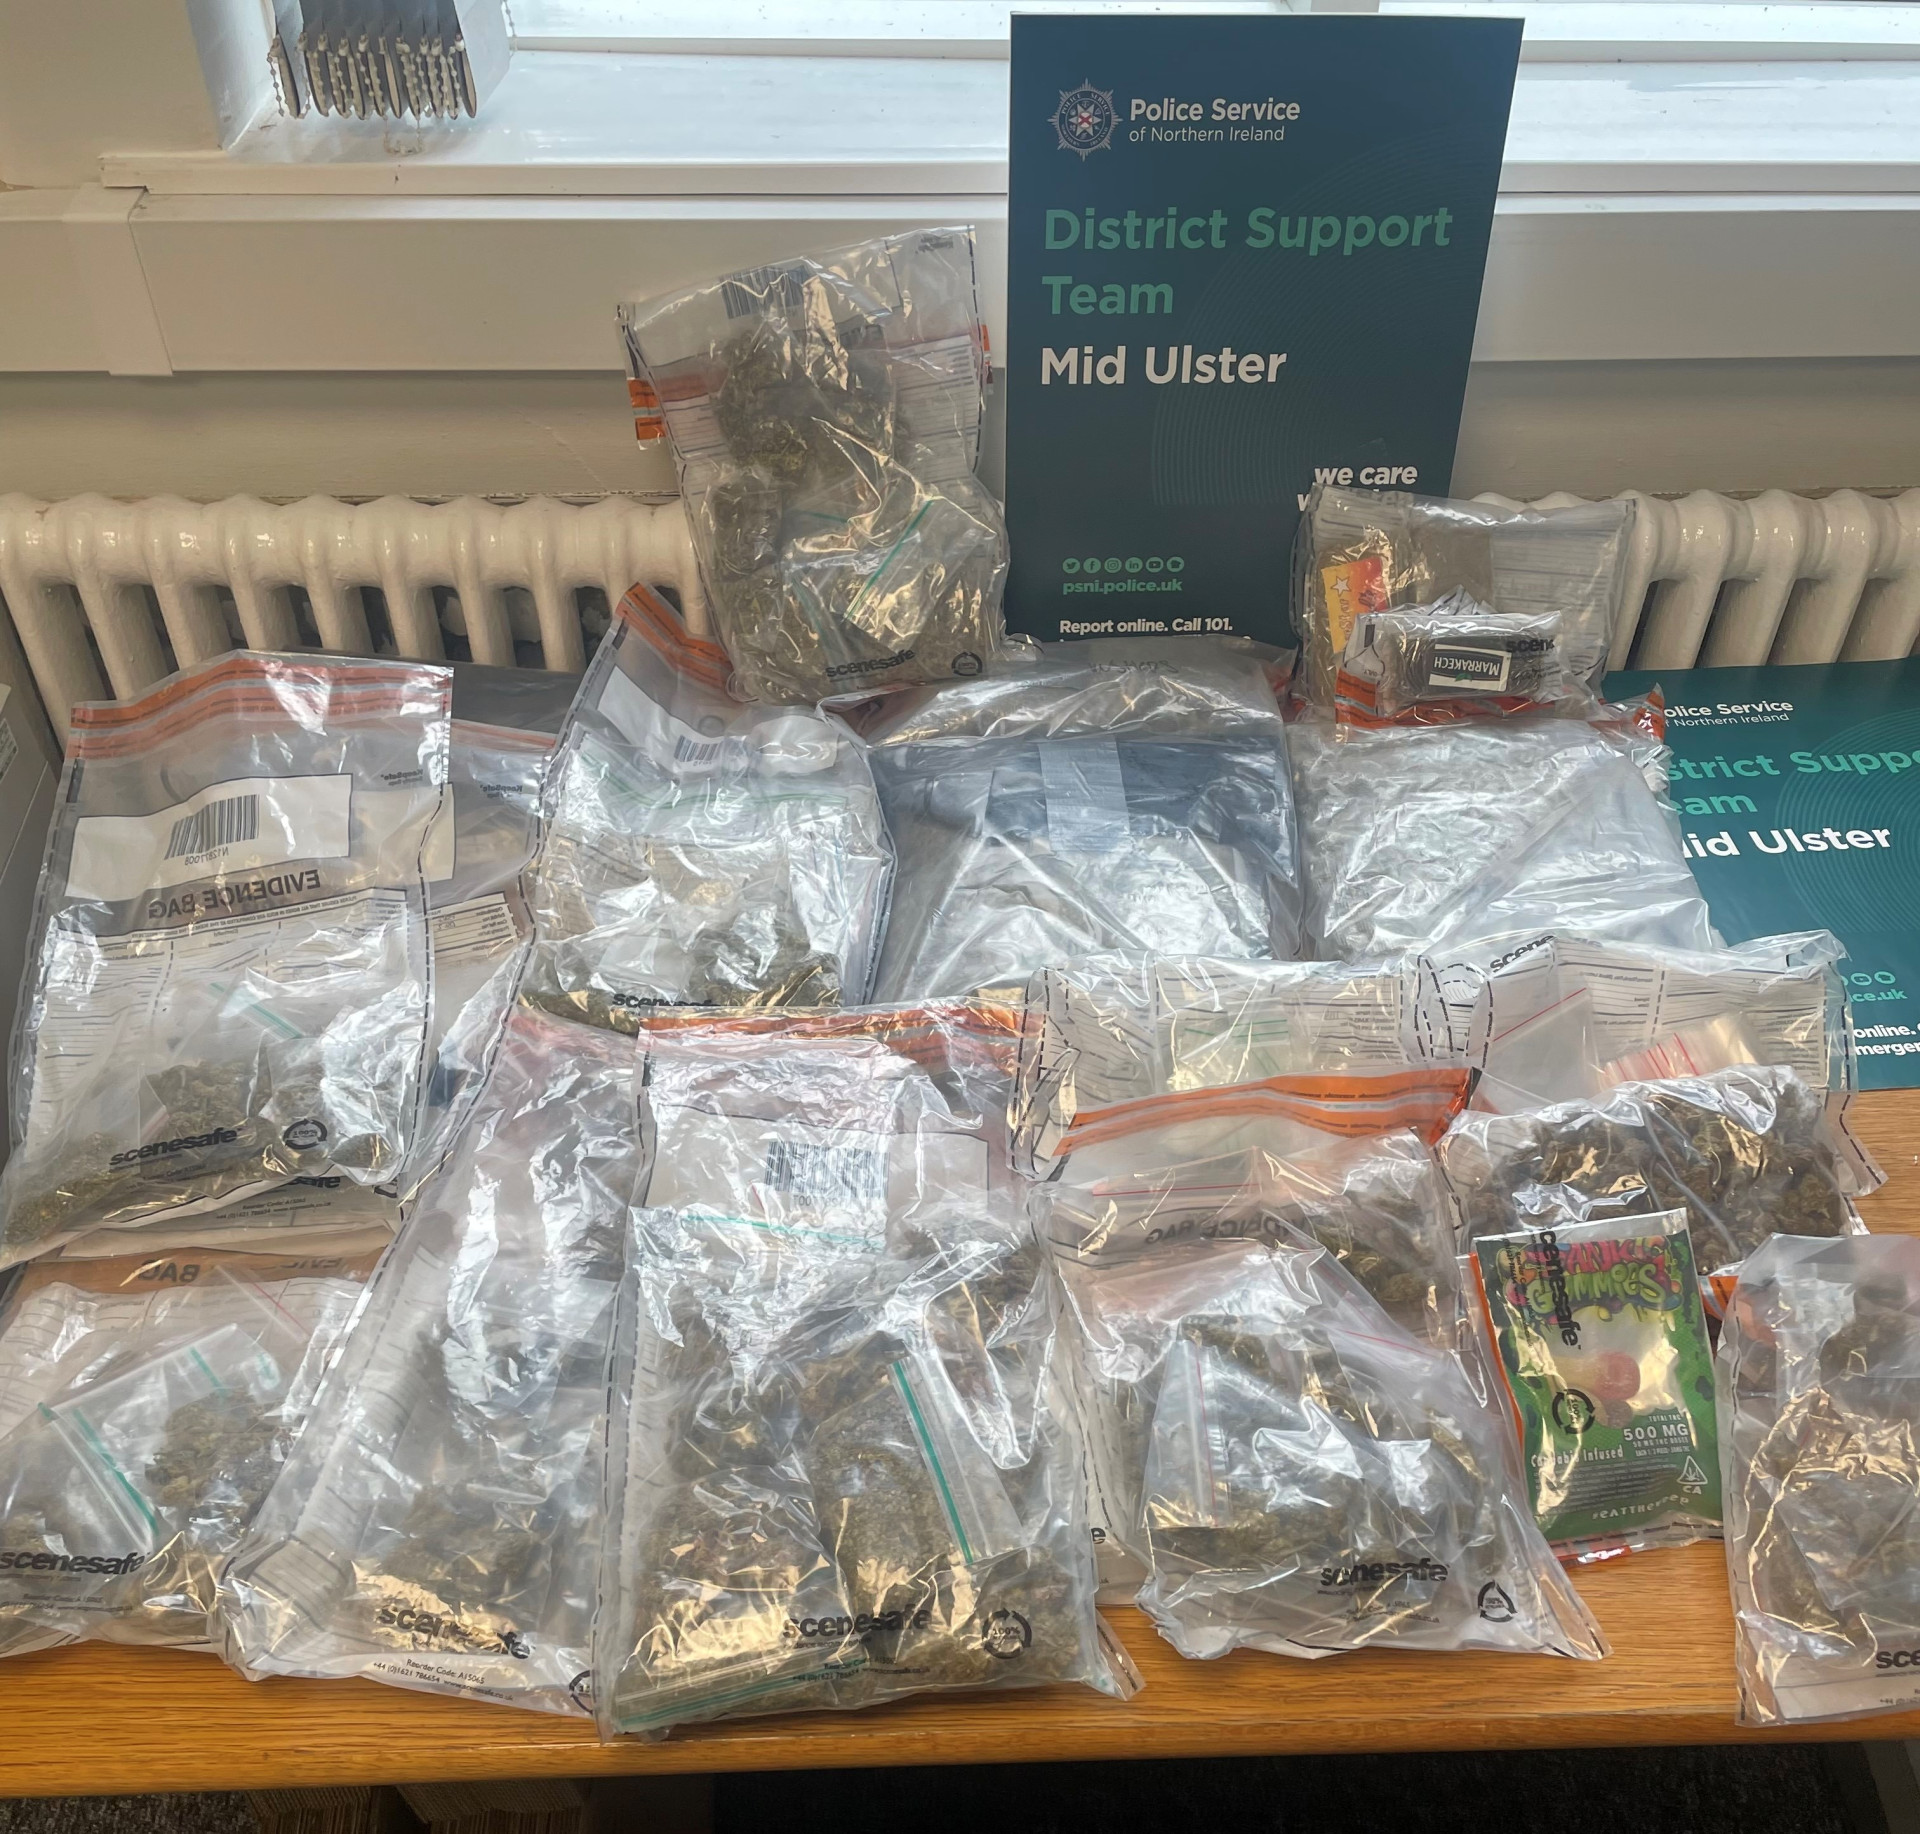 Duo arrested after ‘significant’ cannabis seizure in Cookstown